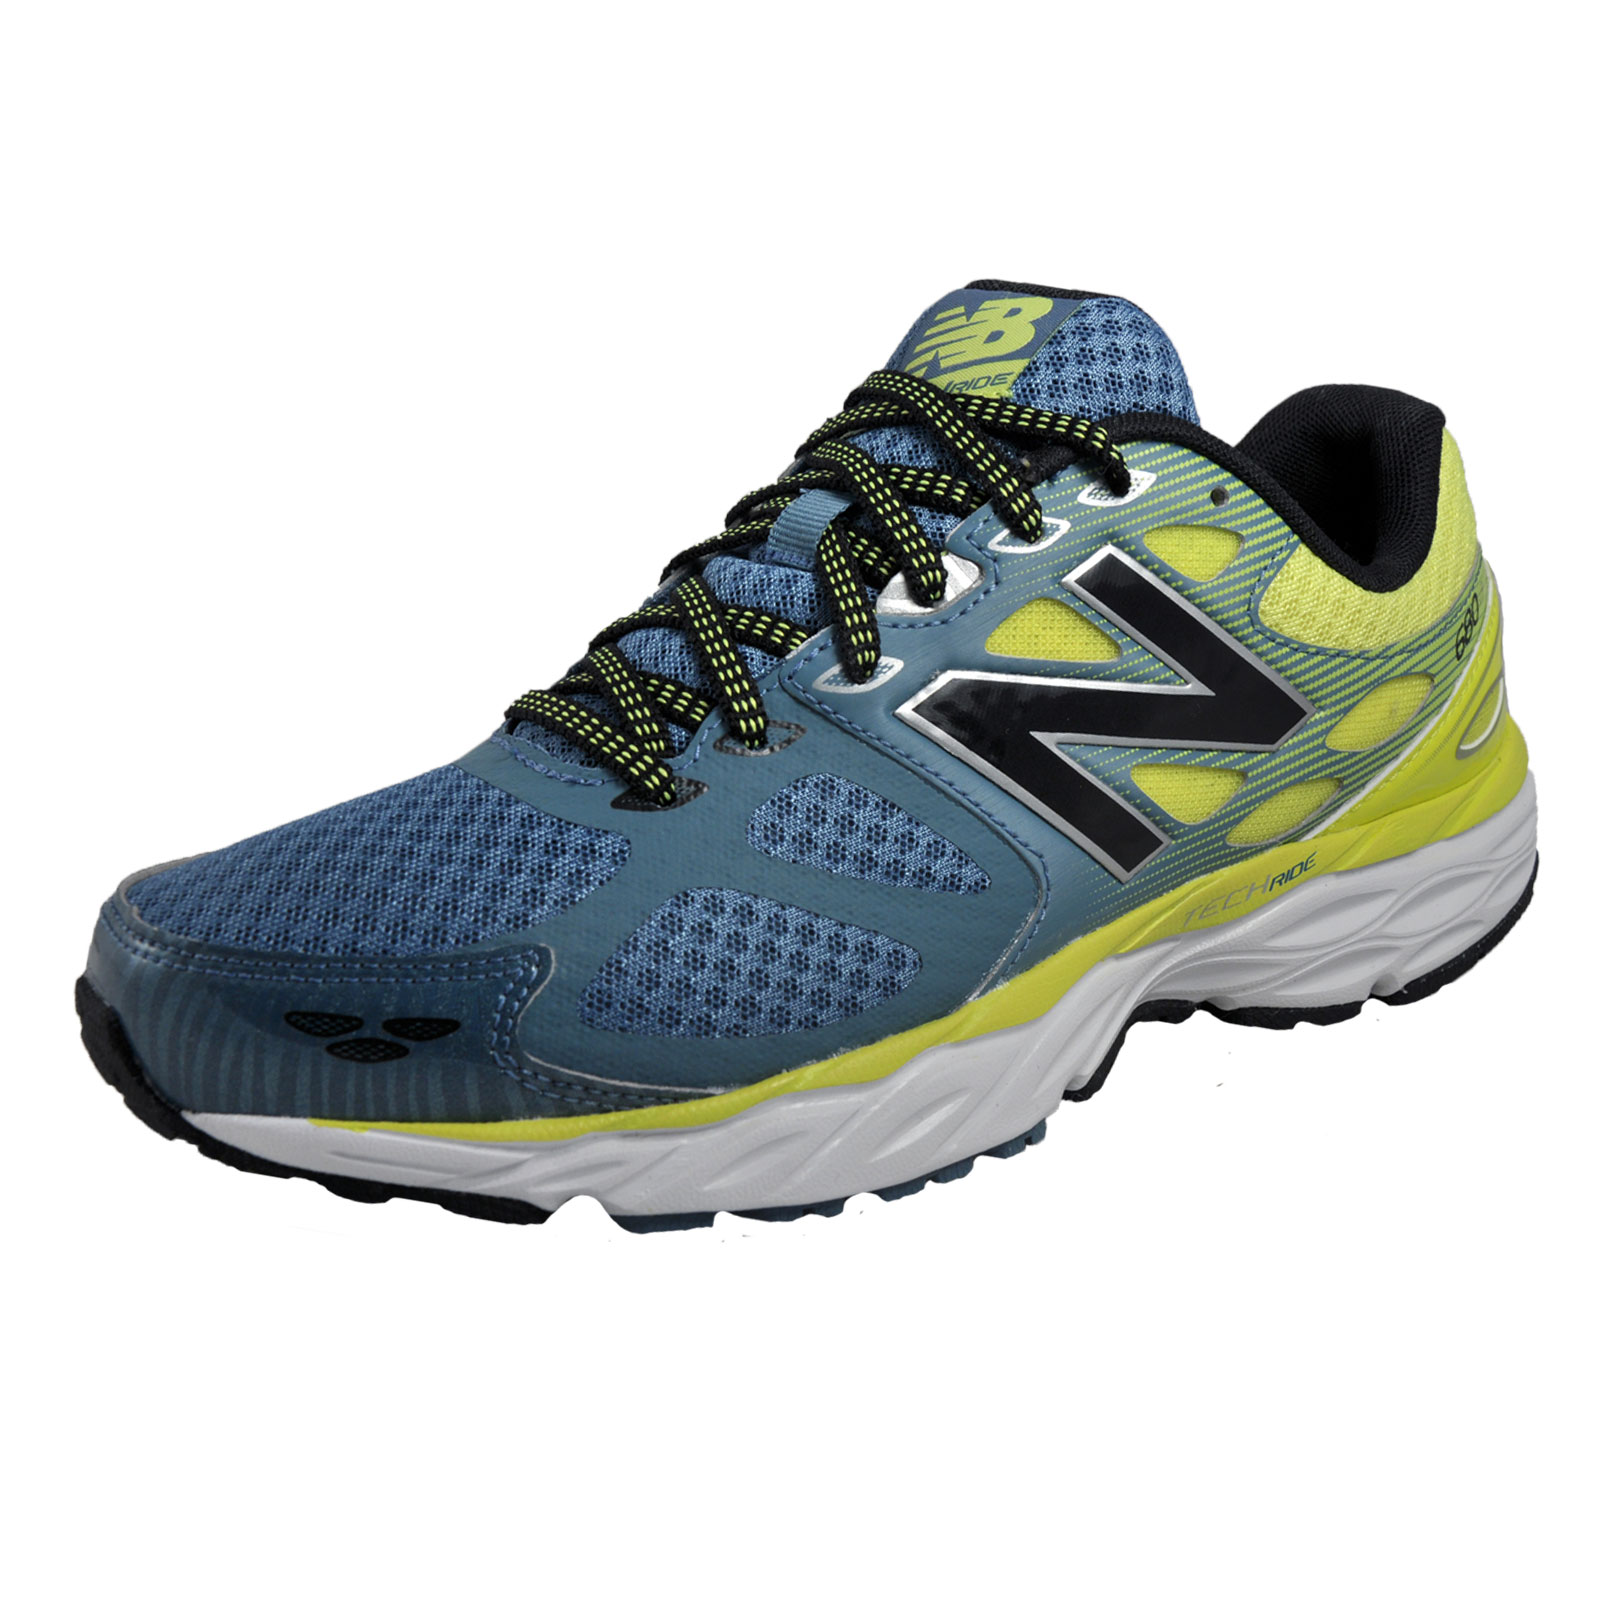 New Balance 680 V3 Mens Running Fitness Gym Trainers Grey